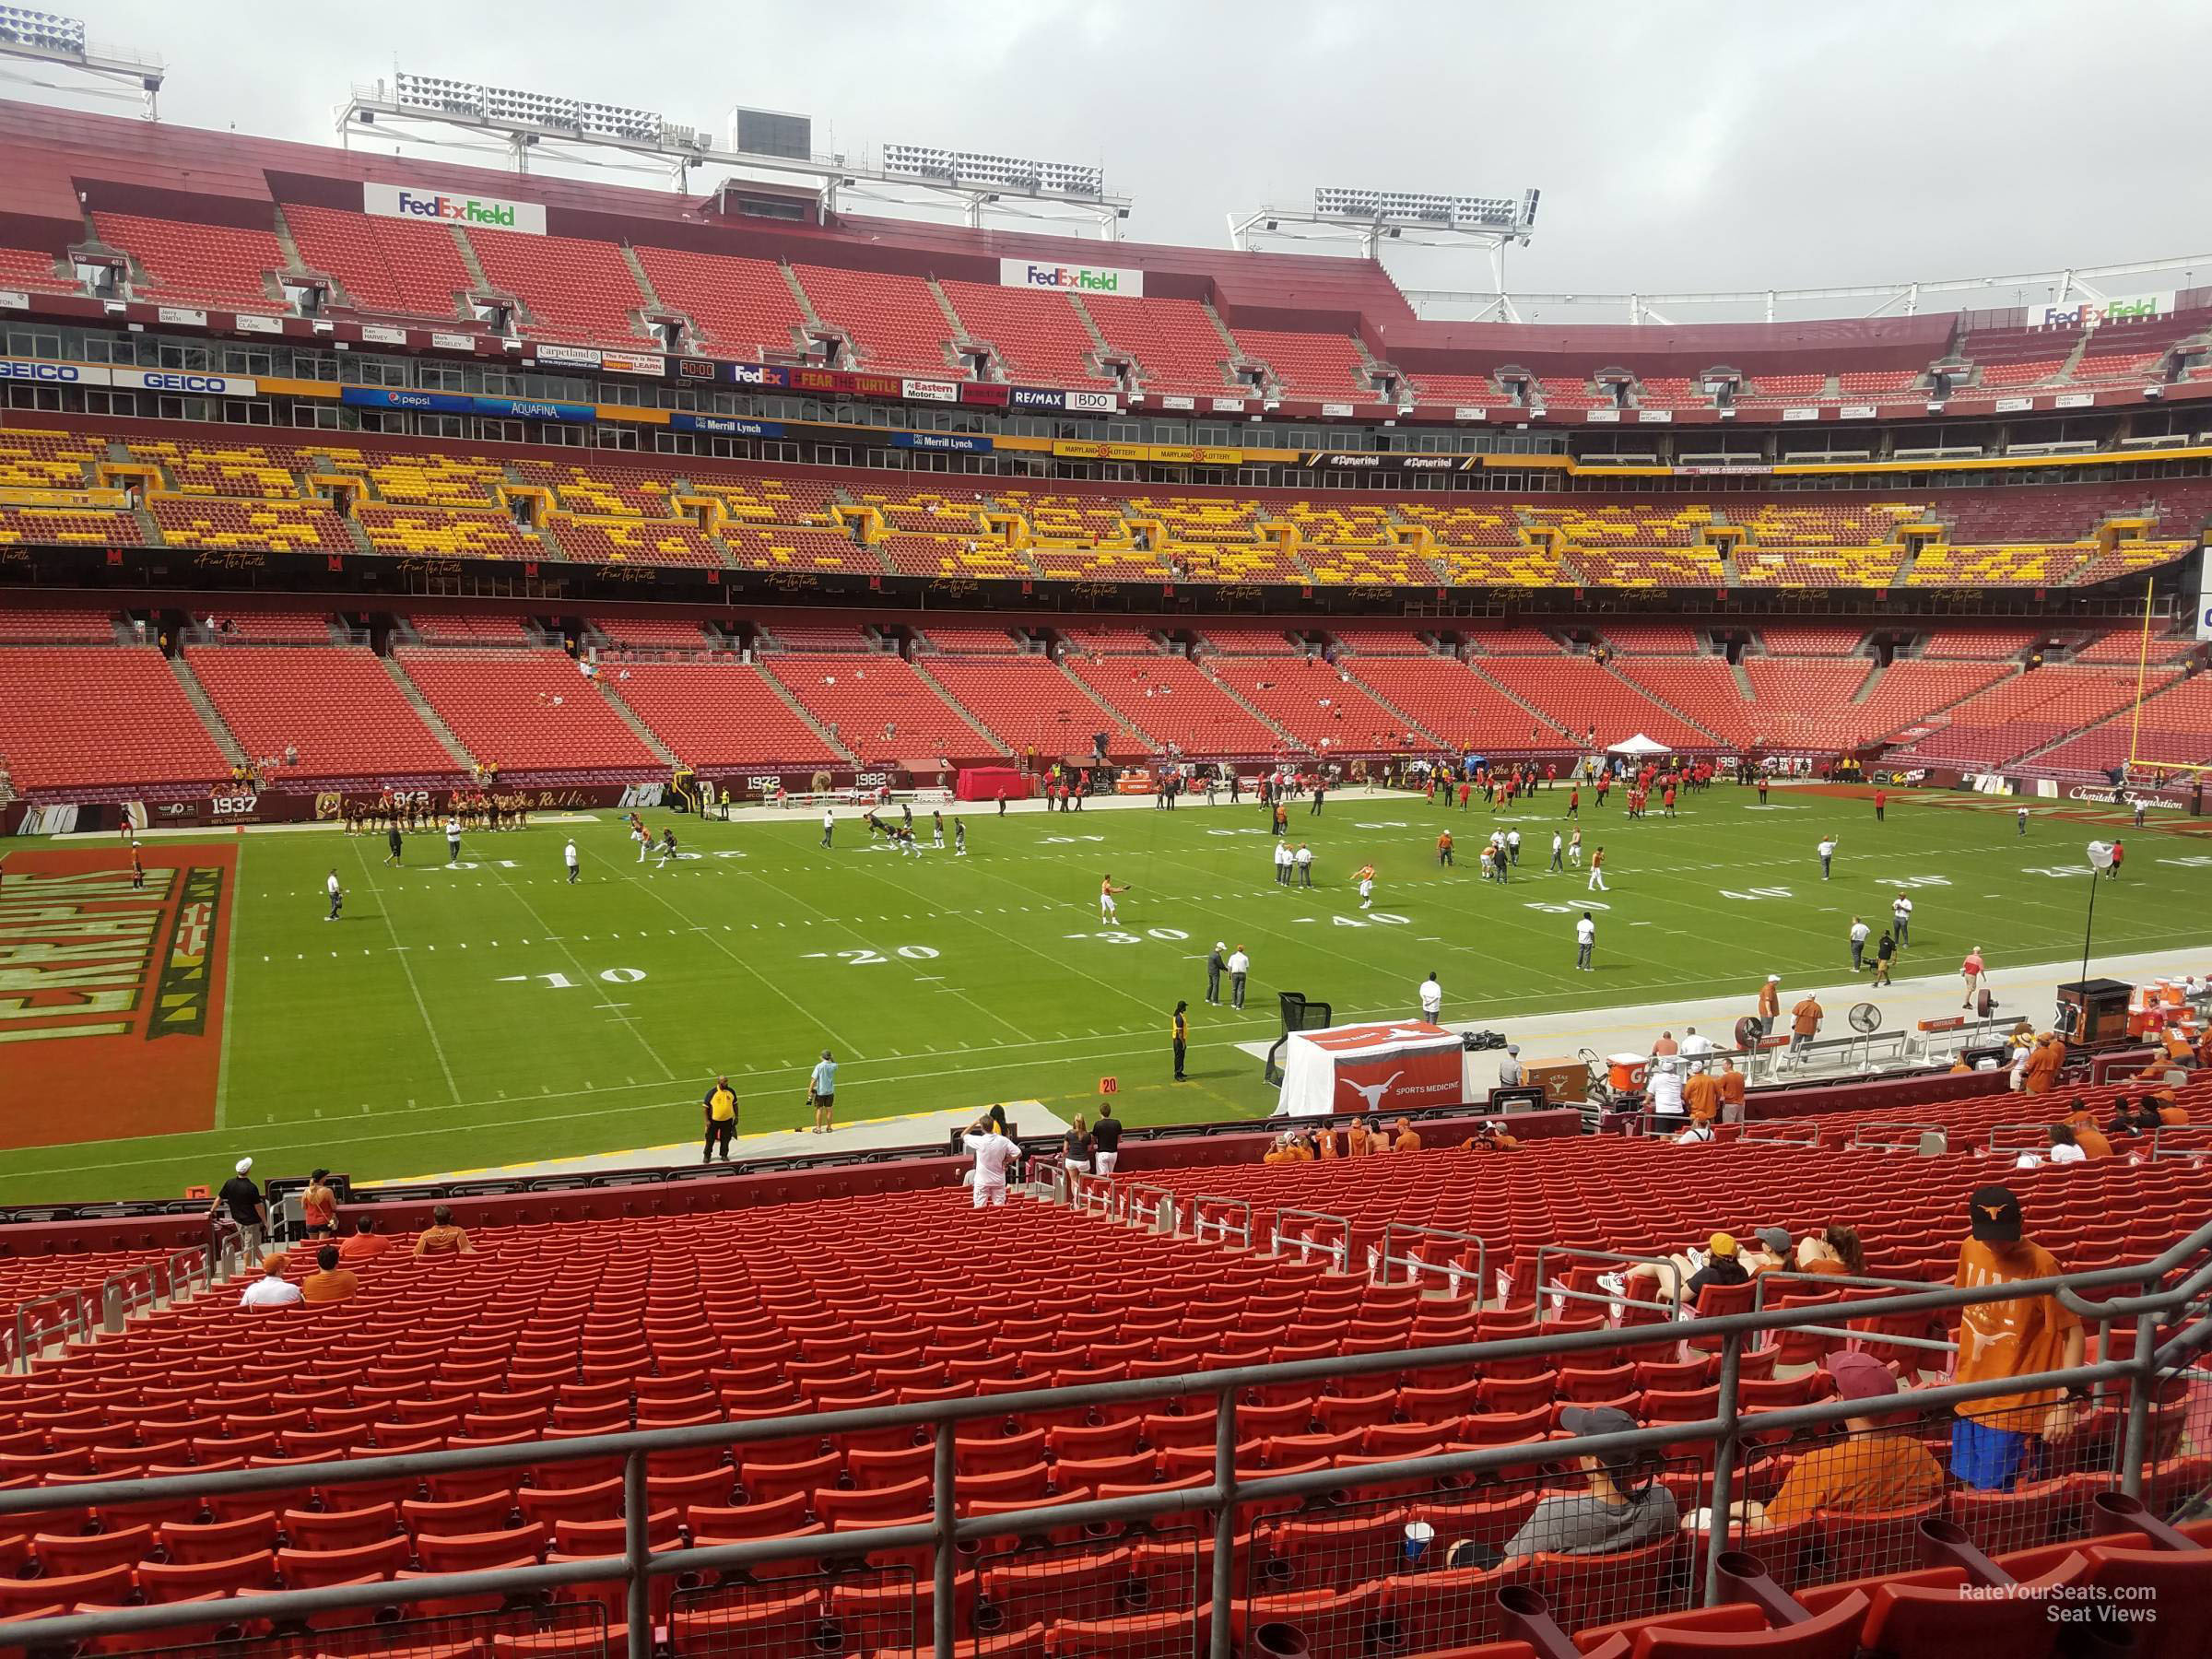 section 225, row 4 seat view  - fedexfield